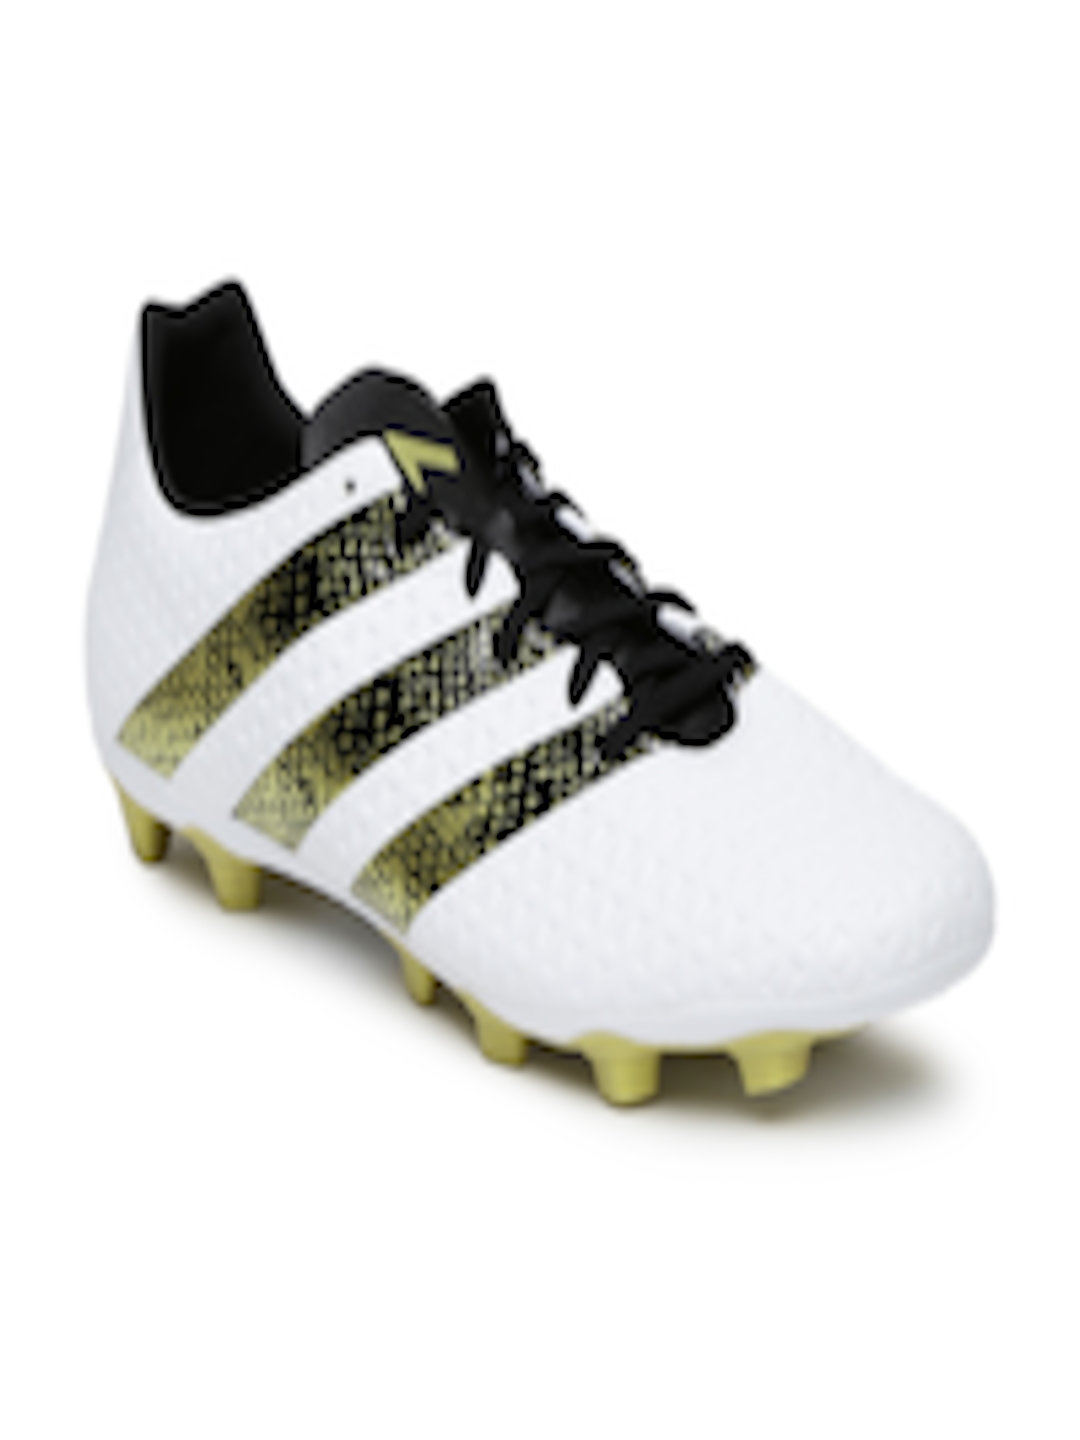 Buy ADIDAS Men White Printed ACE 16.4 Football Shoes